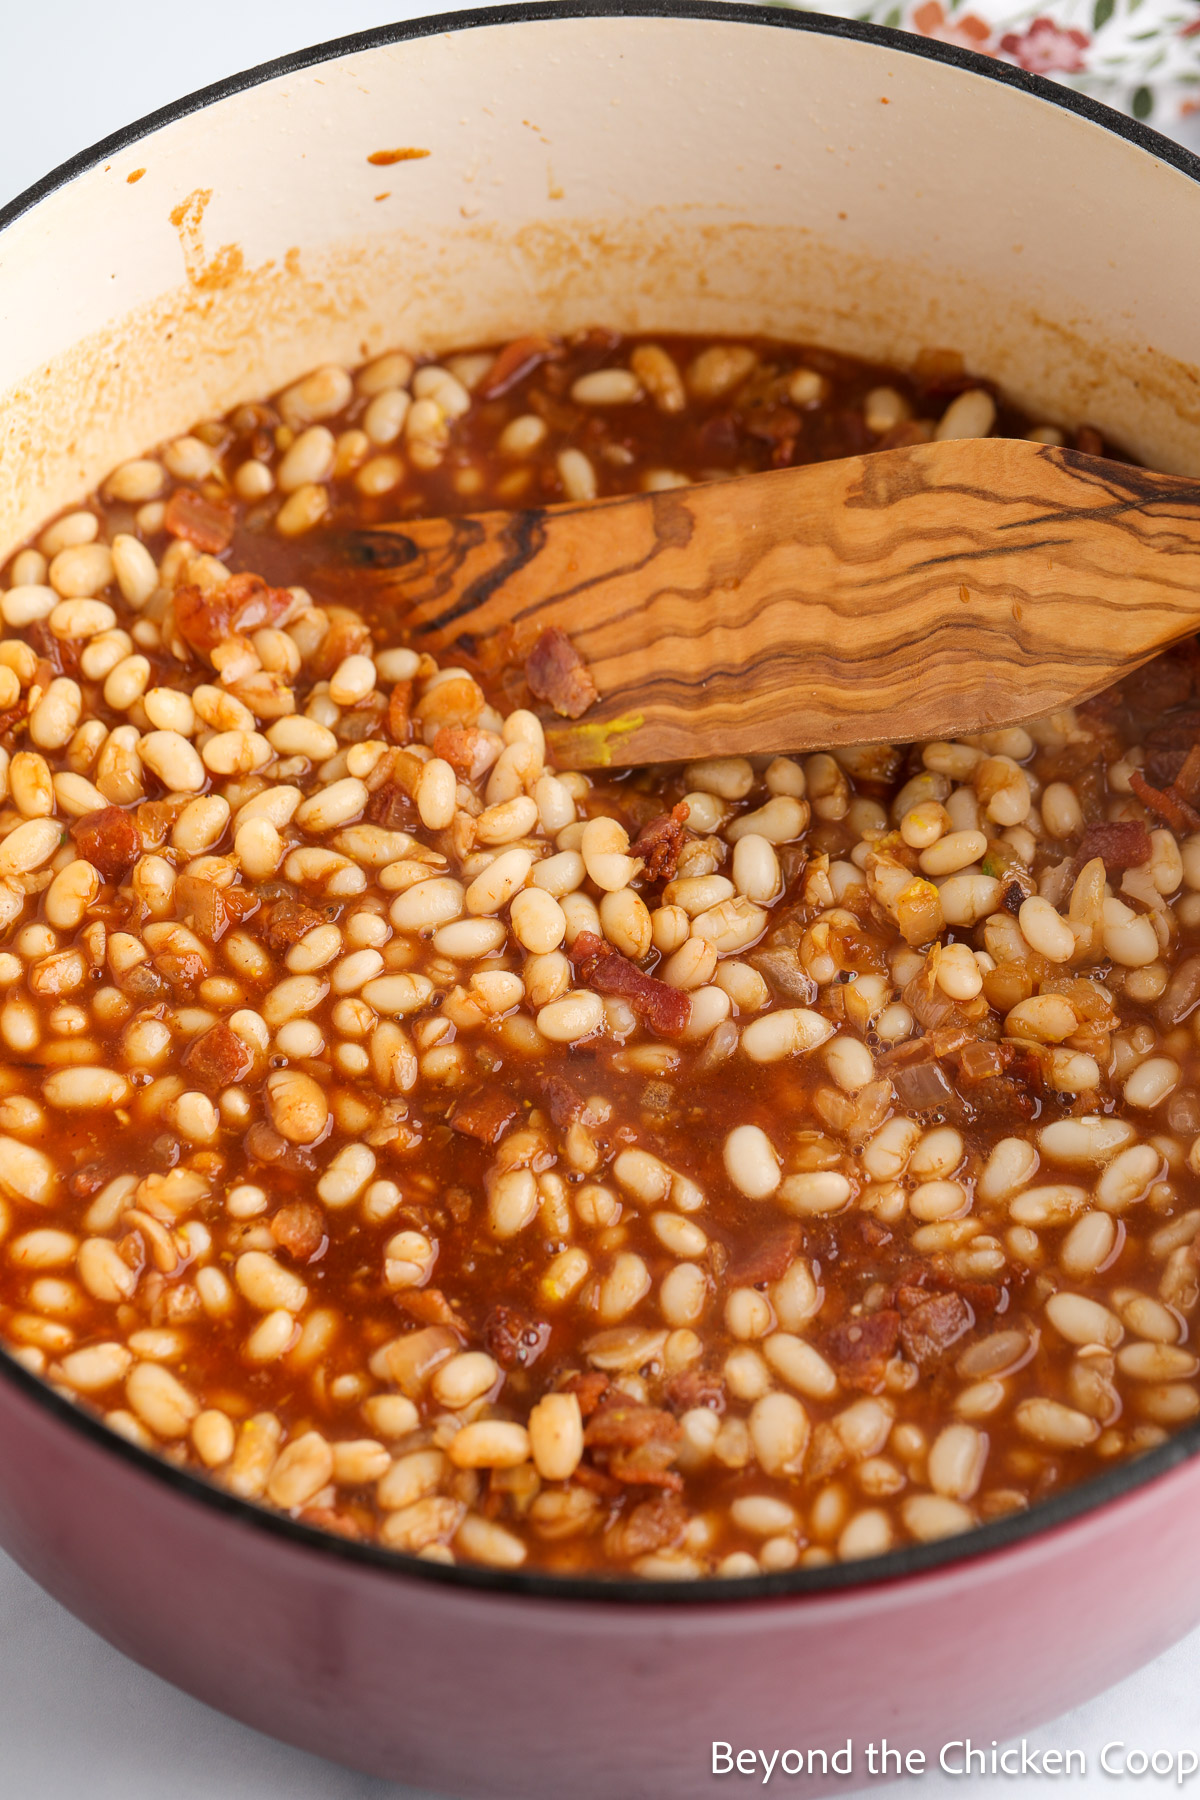 A pot of baked beans ready to go into the oven.